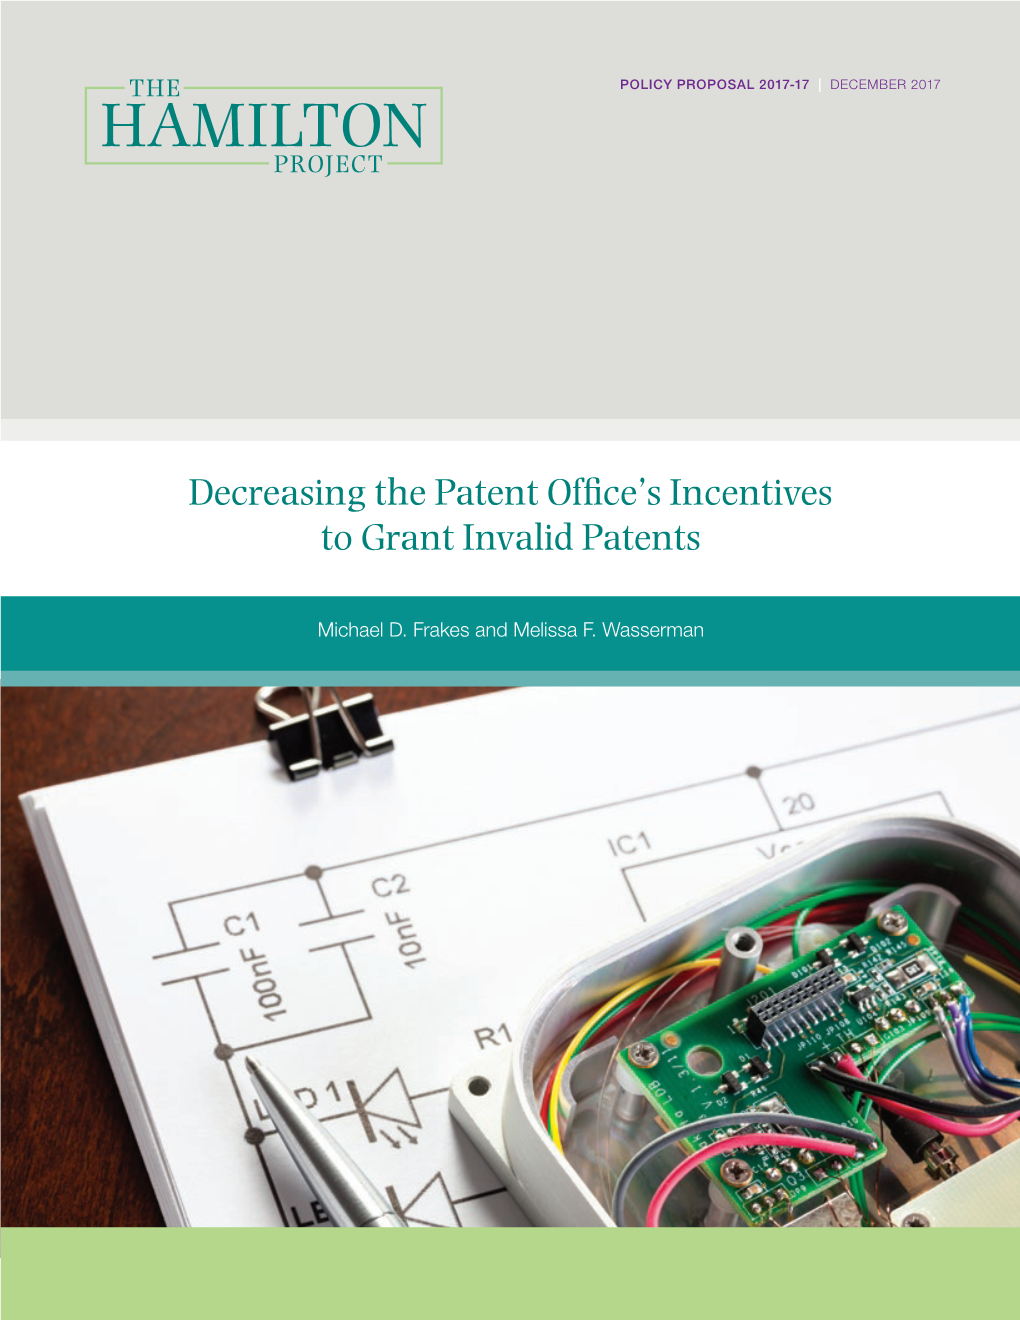 Decreasing the Patent Office's Incentives to Grant Invalid Patents